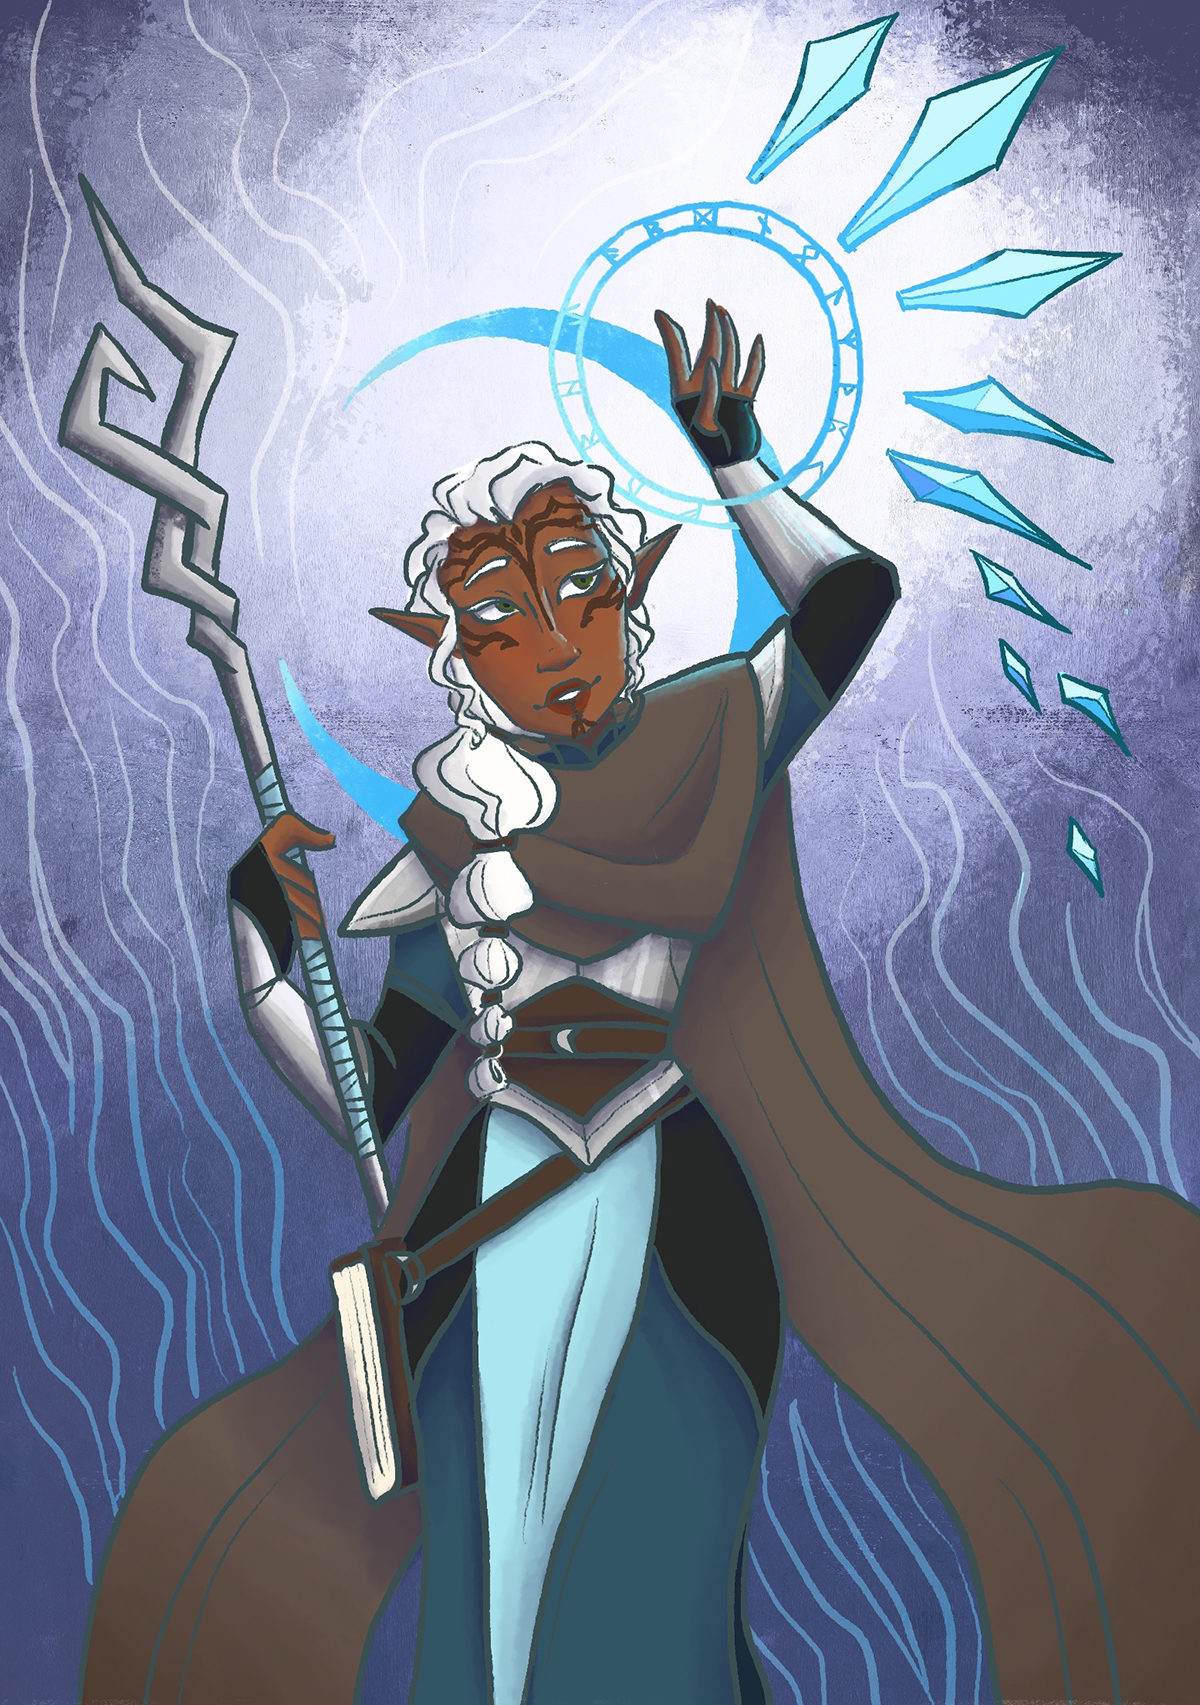 Digital illustration of a black female elven character with flowing cloak, staff in right hand, left hand held up with blue circle and shooting diamonds around it denoting magic or power